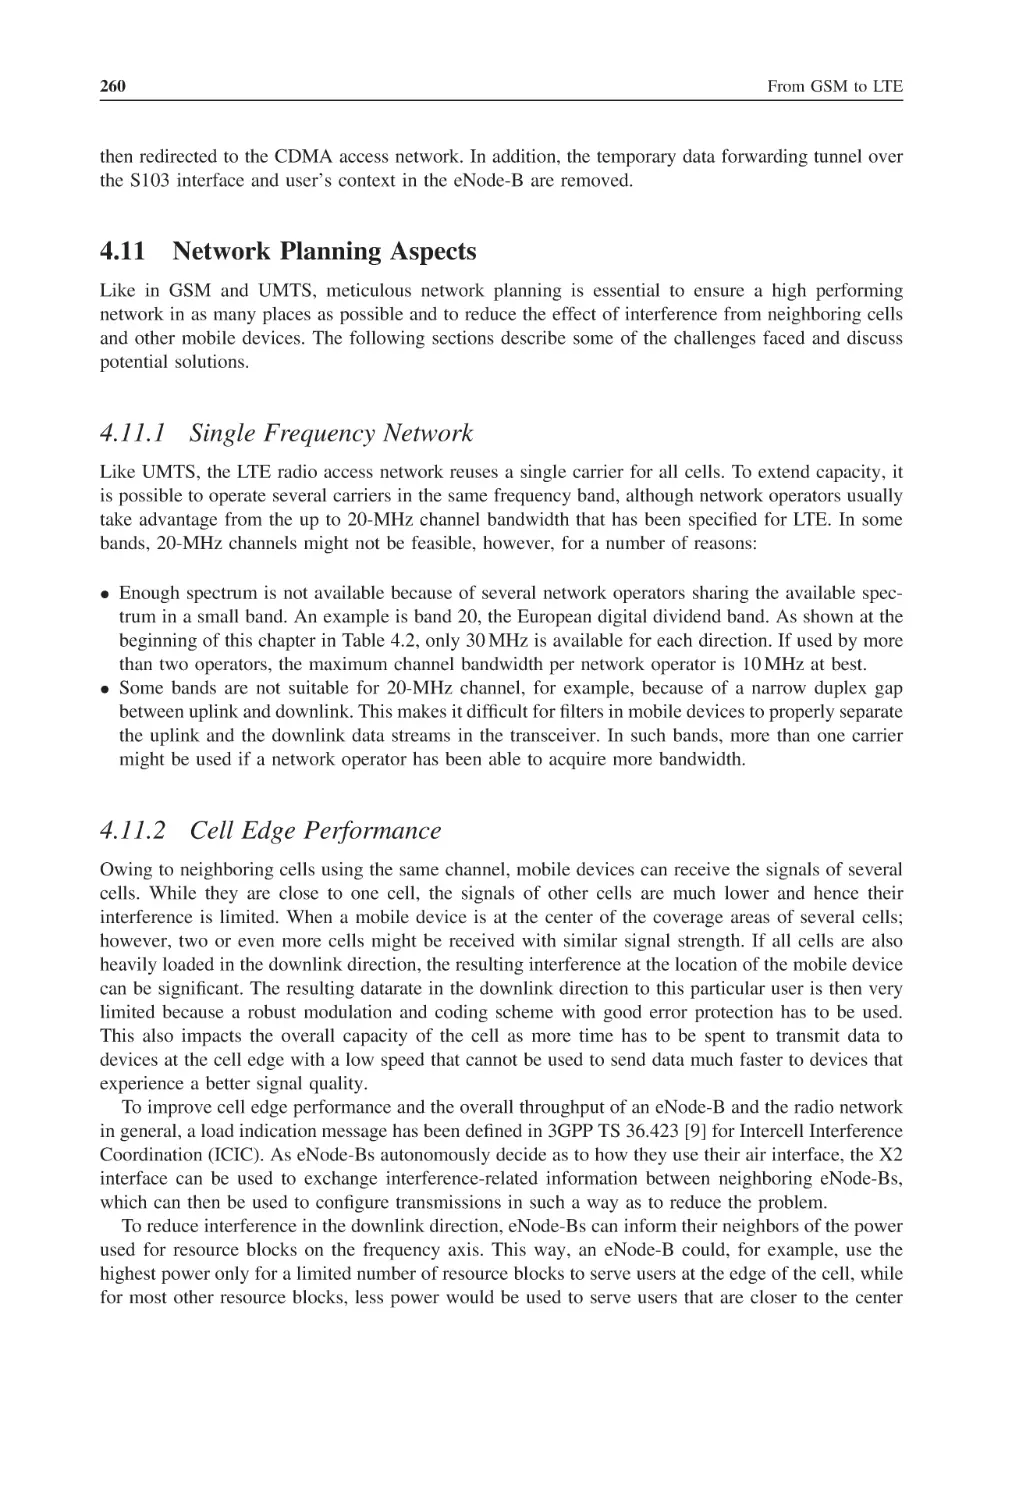 4.11 Network Planning Aspects
4.11.1 Single Frequency Network
4.11.2 Cell Edge Performance